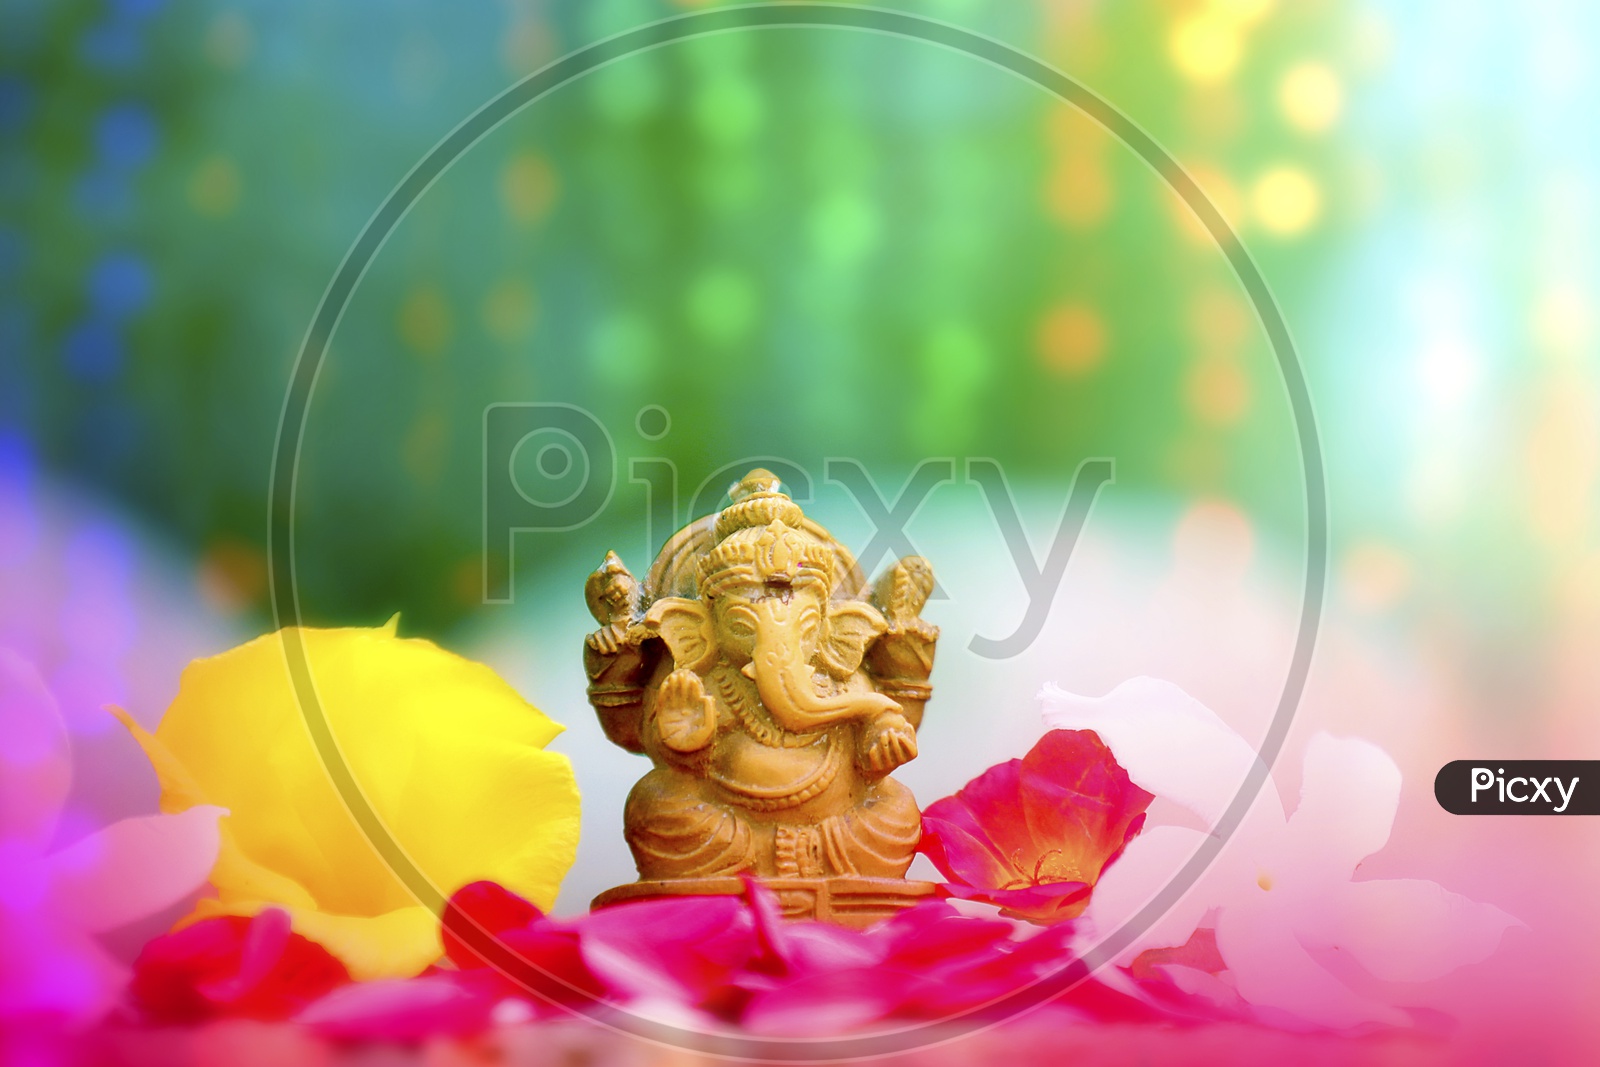 Beautiful photograph of Ganesh Idol with greenery in the background / Lord Ganesha